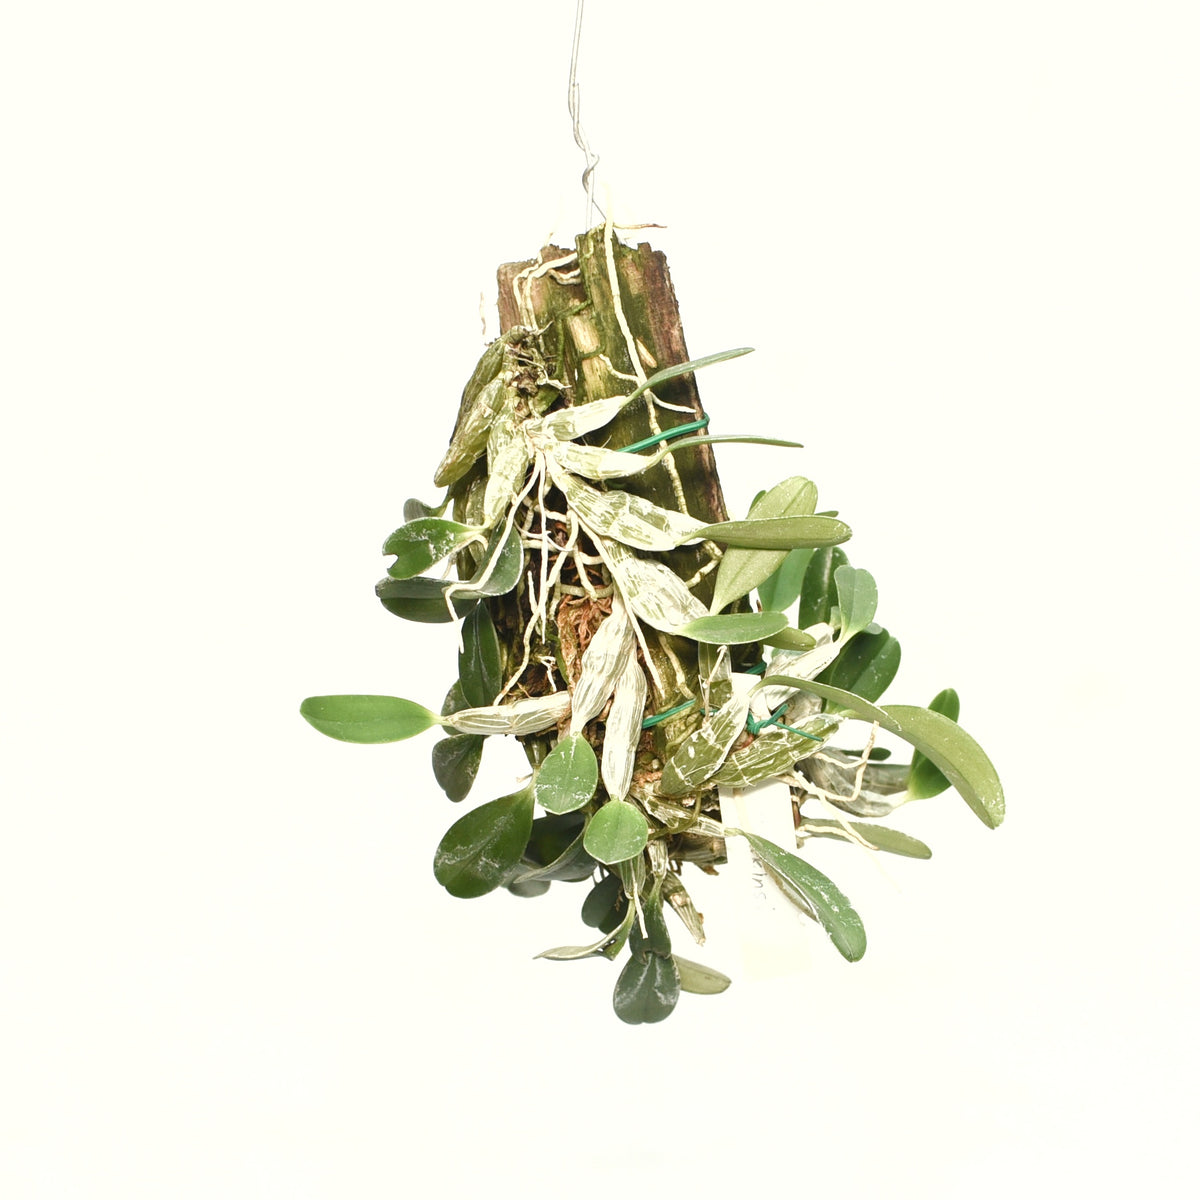 Transform your home into a botanical paradise with Dendrobium Jenkinsii Twisted orchids. Explore our collection today!